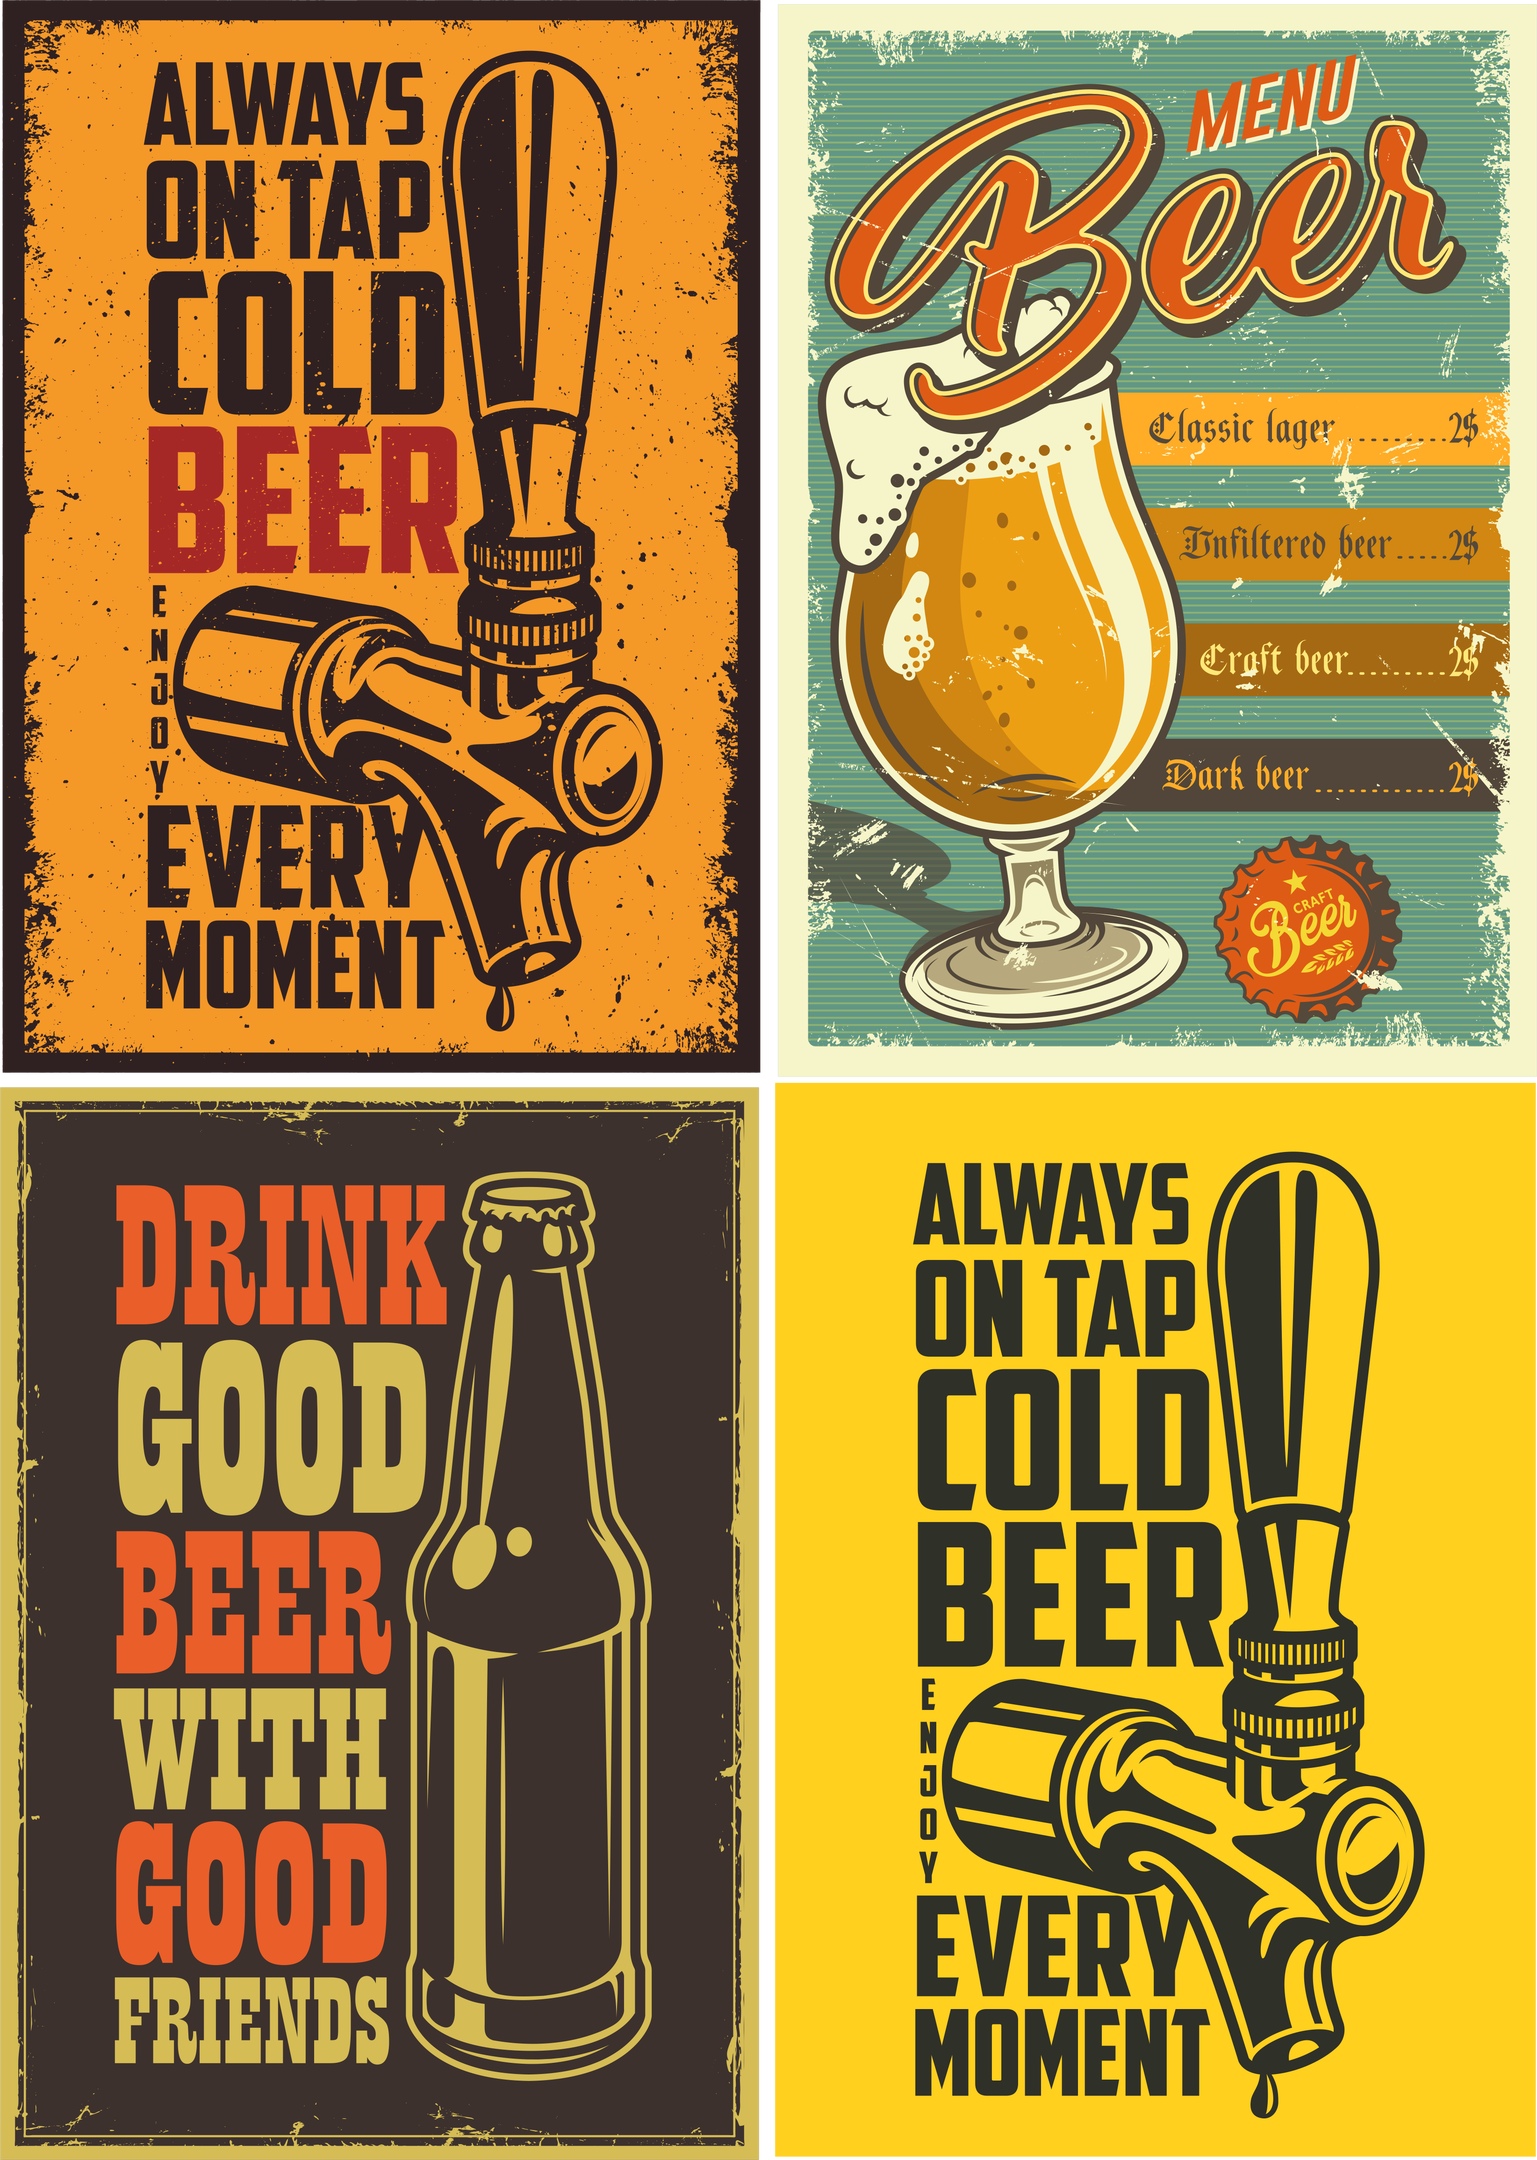 Retro Beer Posters 3 Free Vector cdr Download - 3axis.co